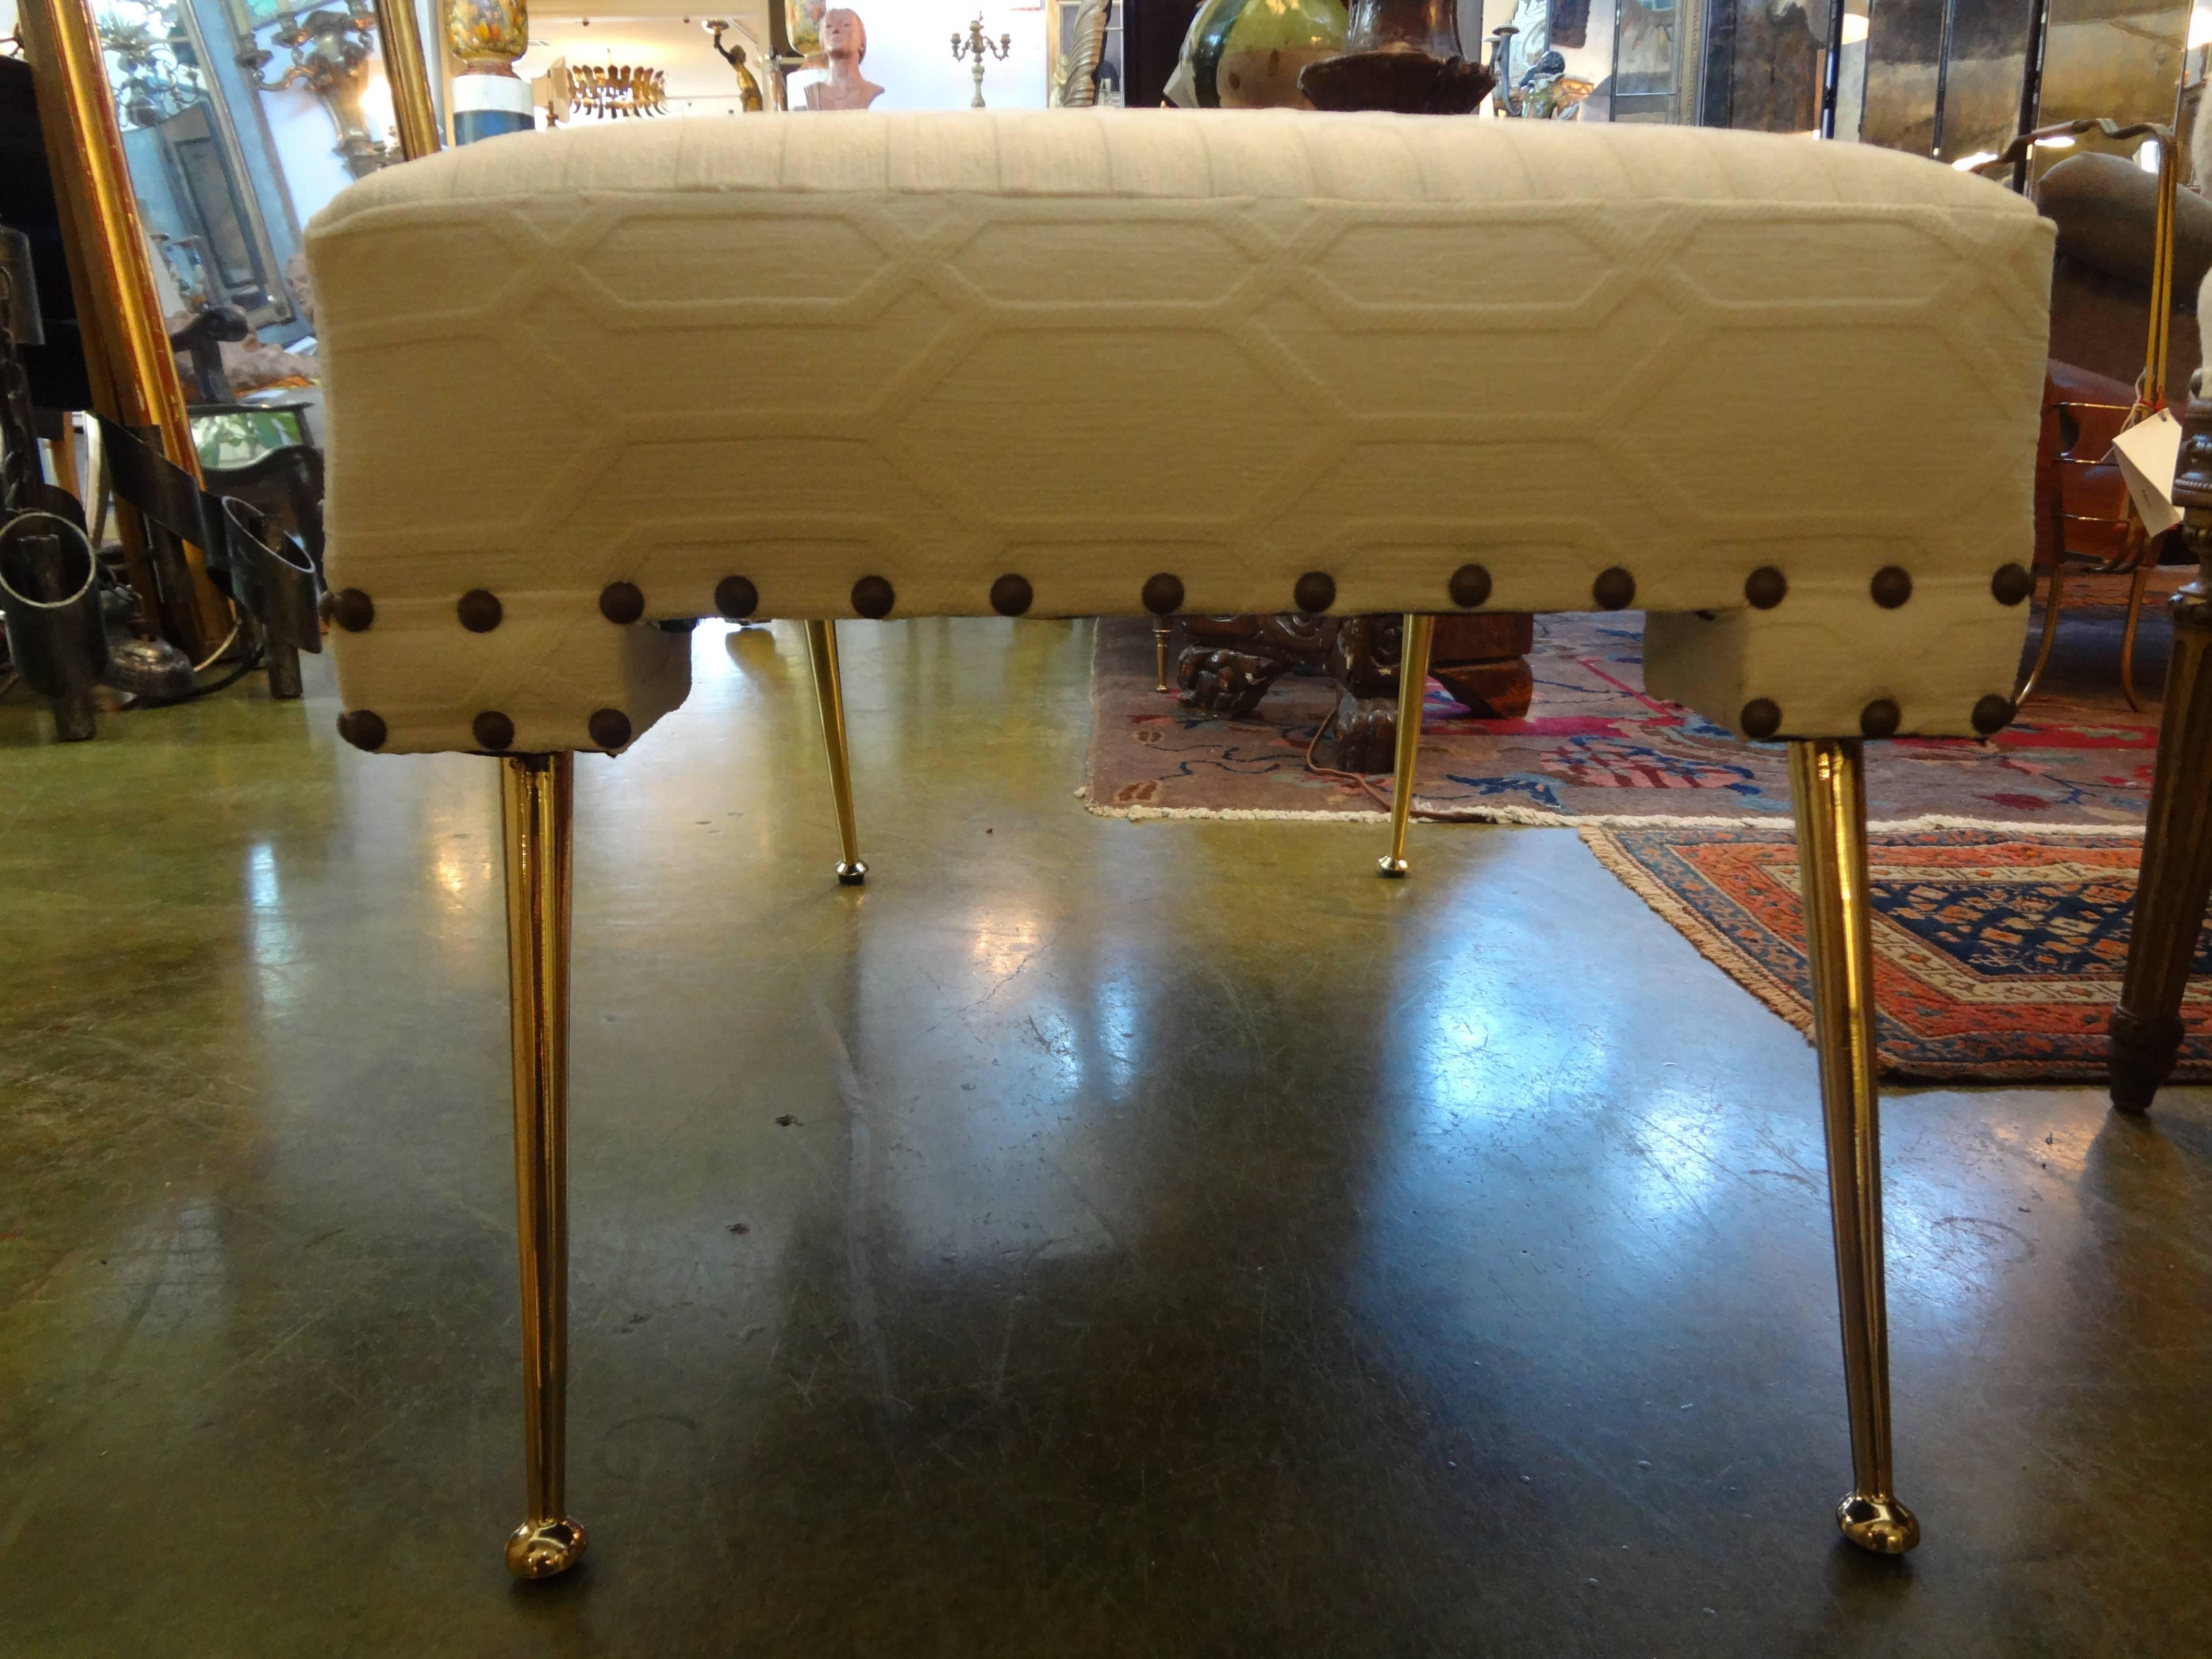 Stylish pair of Italian Mid-Century Modern Gio Ponti inspired benches or ottomans with brass splayed legs. These ottomans/benches were taken down to the frames and professionally upholstered in cream colored textured velvet with brass nailhead